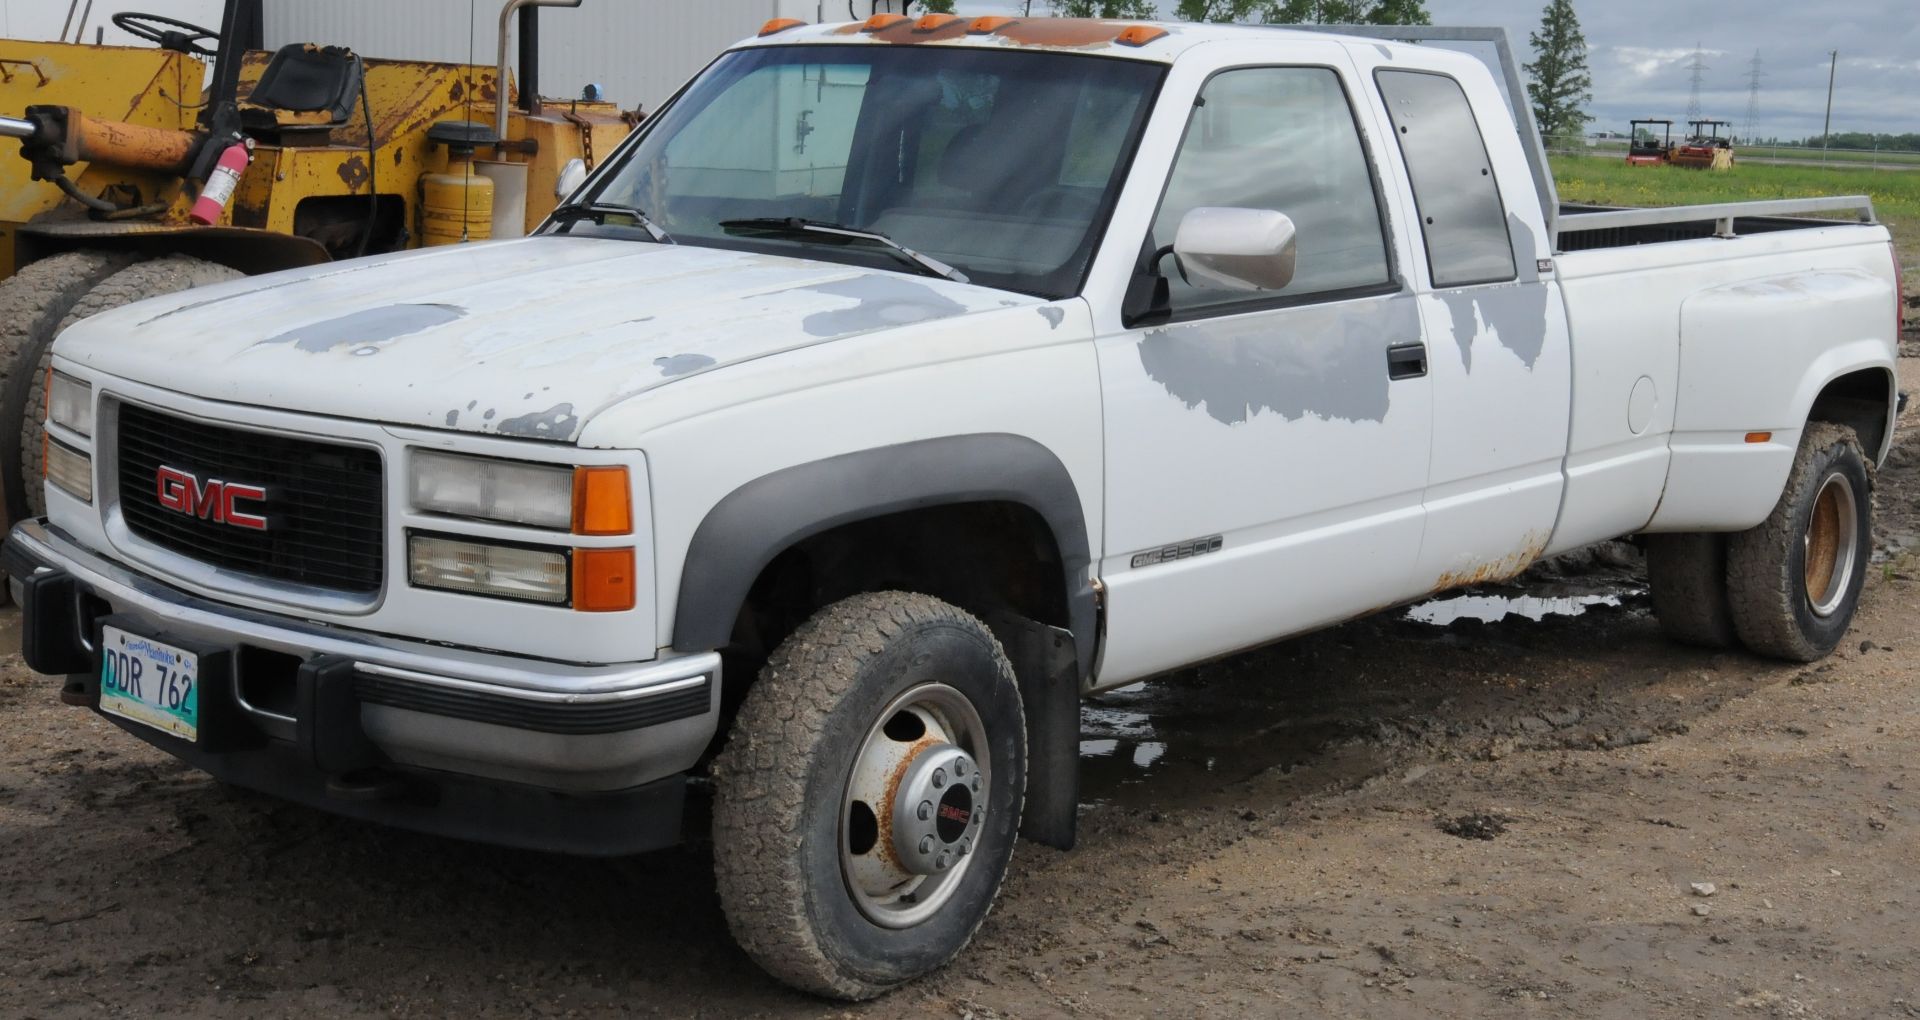 GMC (1994) SIERRA K3500 SLE EXTENDED CAB PICKUP TRUCK WITH 6.5L TURBODIESEL ENGINE, 4 SPEED MANUAL